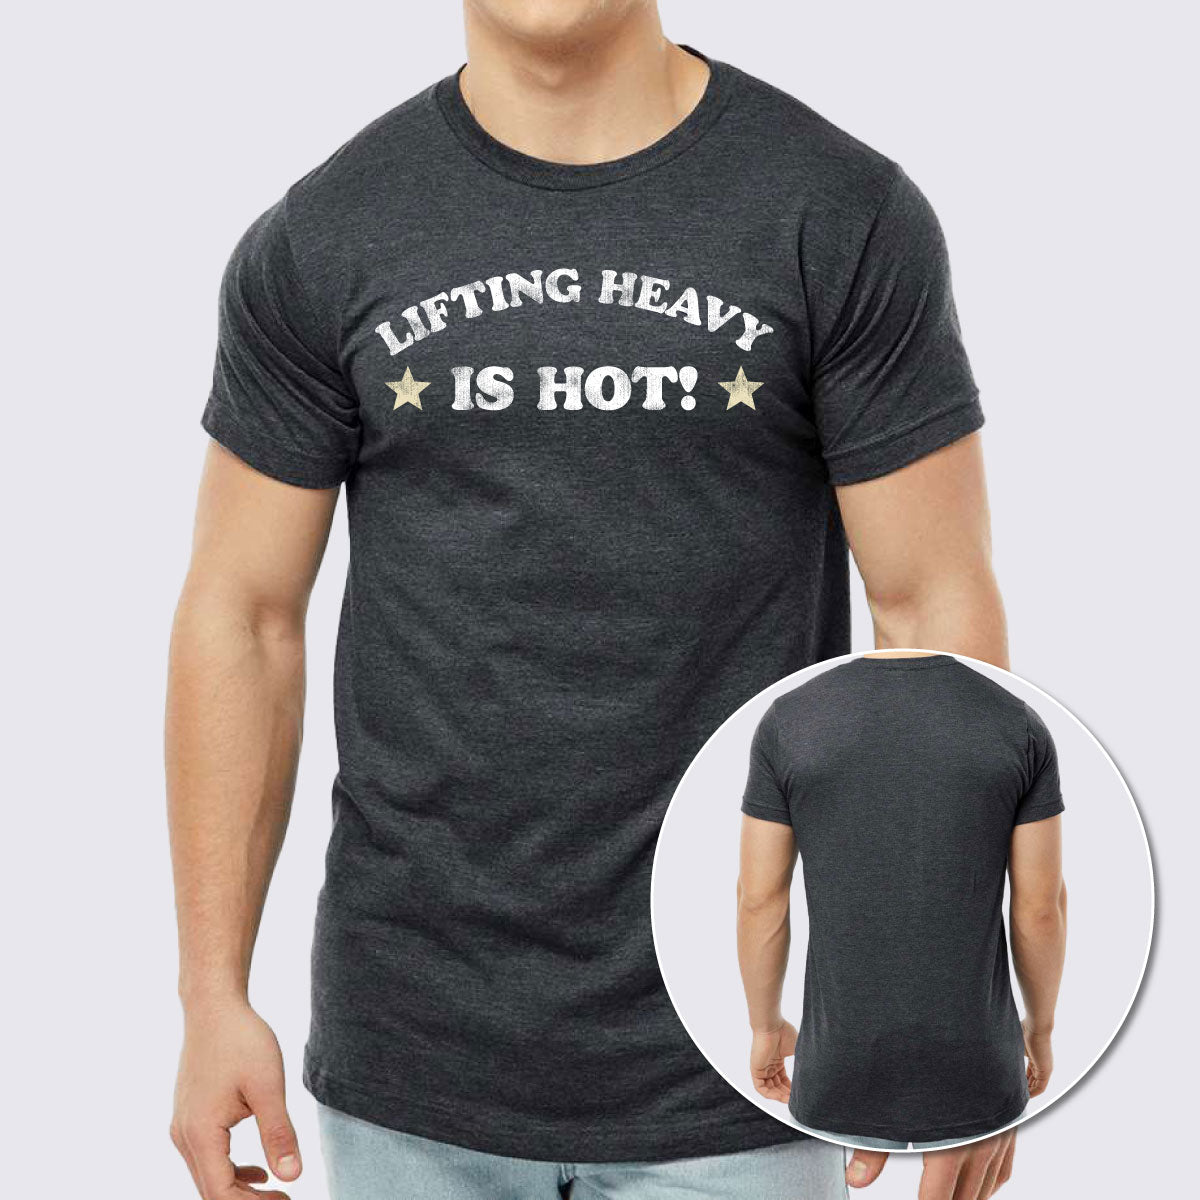 Lifting Heavy is Hot Unisex Fine Jersey T-Shirt